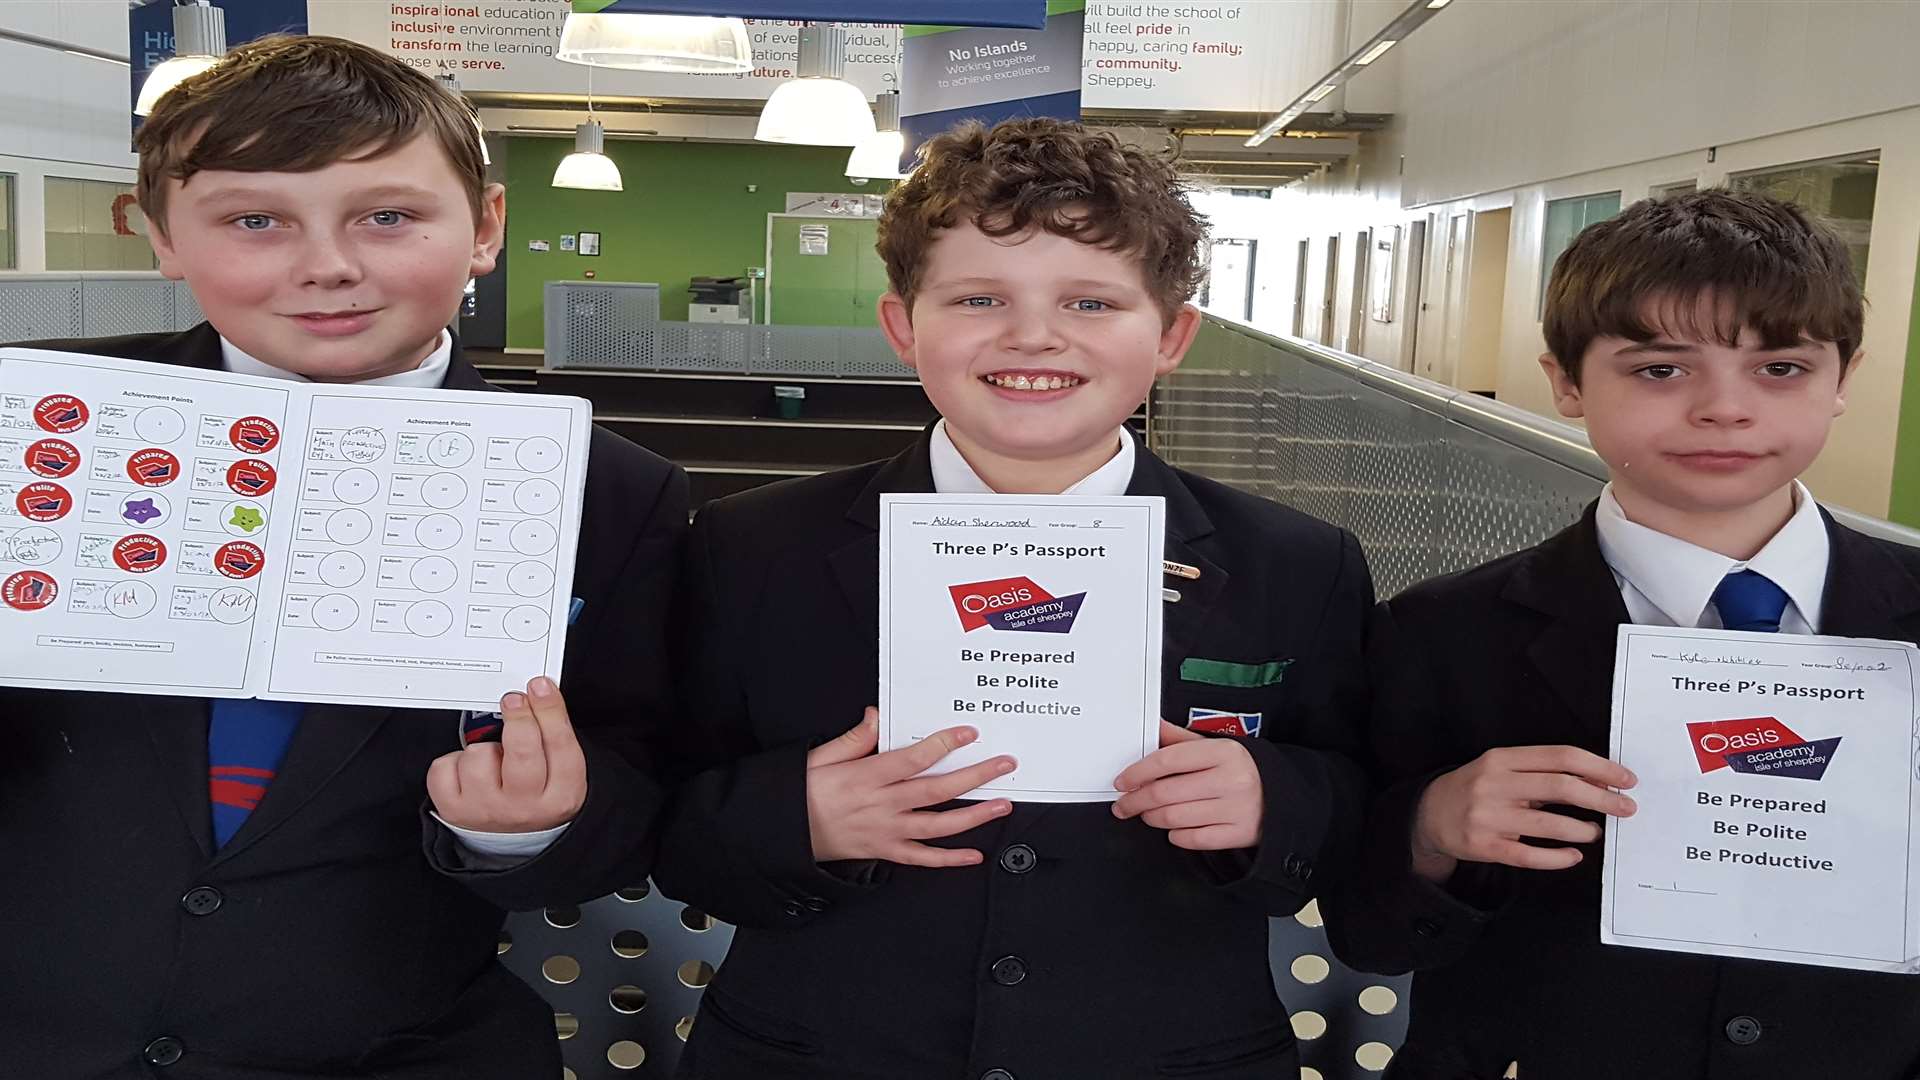 The passport has had a mixed reaction: Pupils Cody Hester, 13, Aidan Sherwood, 12, and Kyle Whibley, also 12